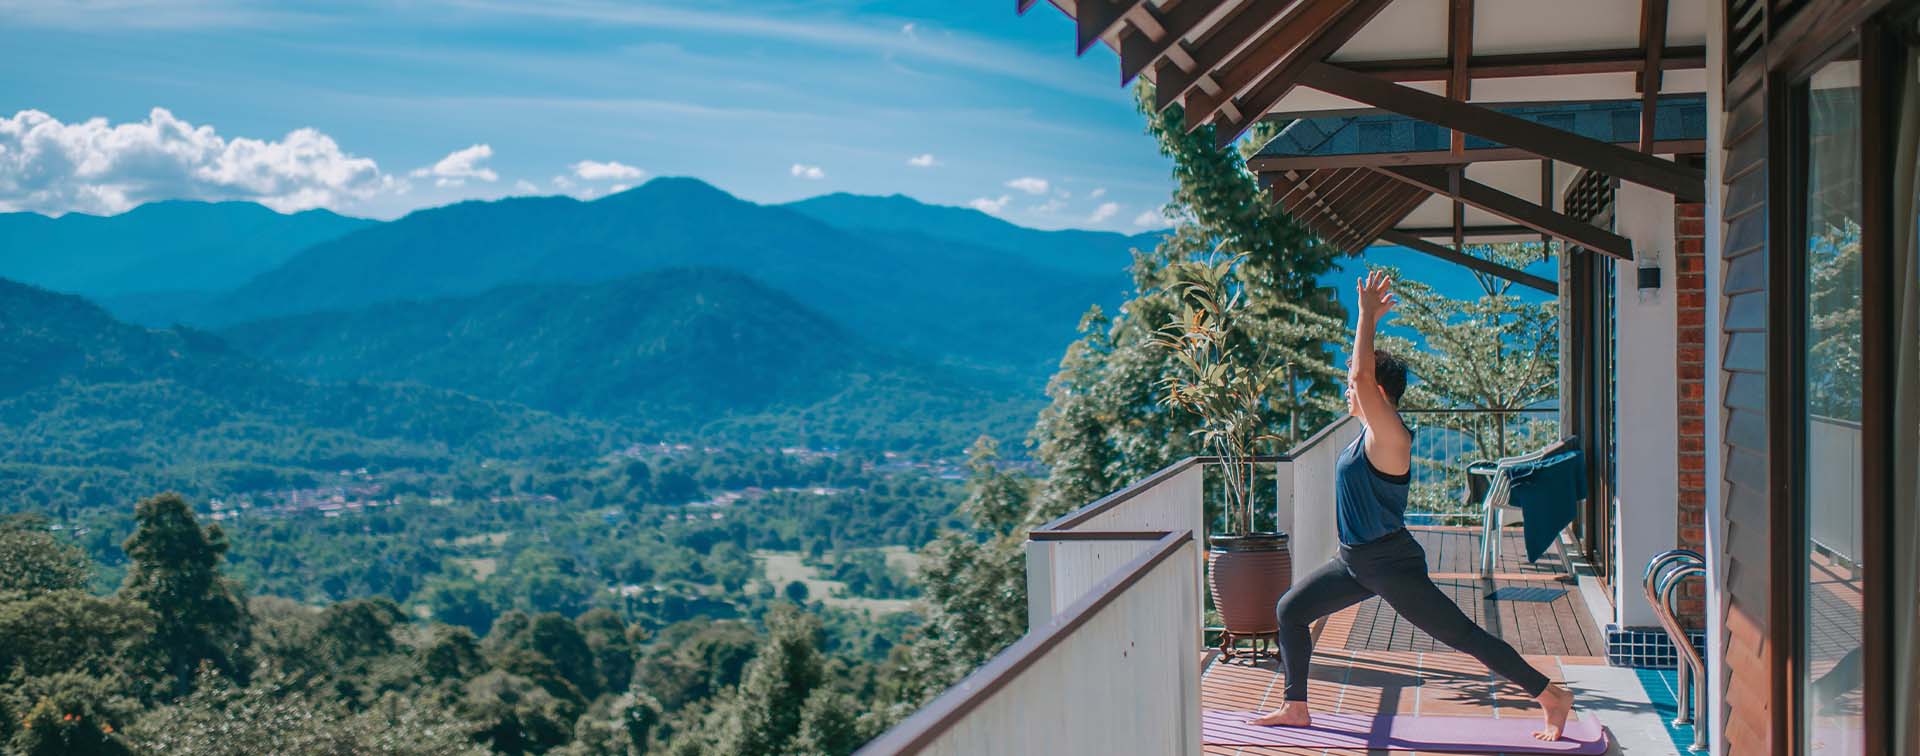 A woman practising yoga on a balcony overlooking a valley and mountains